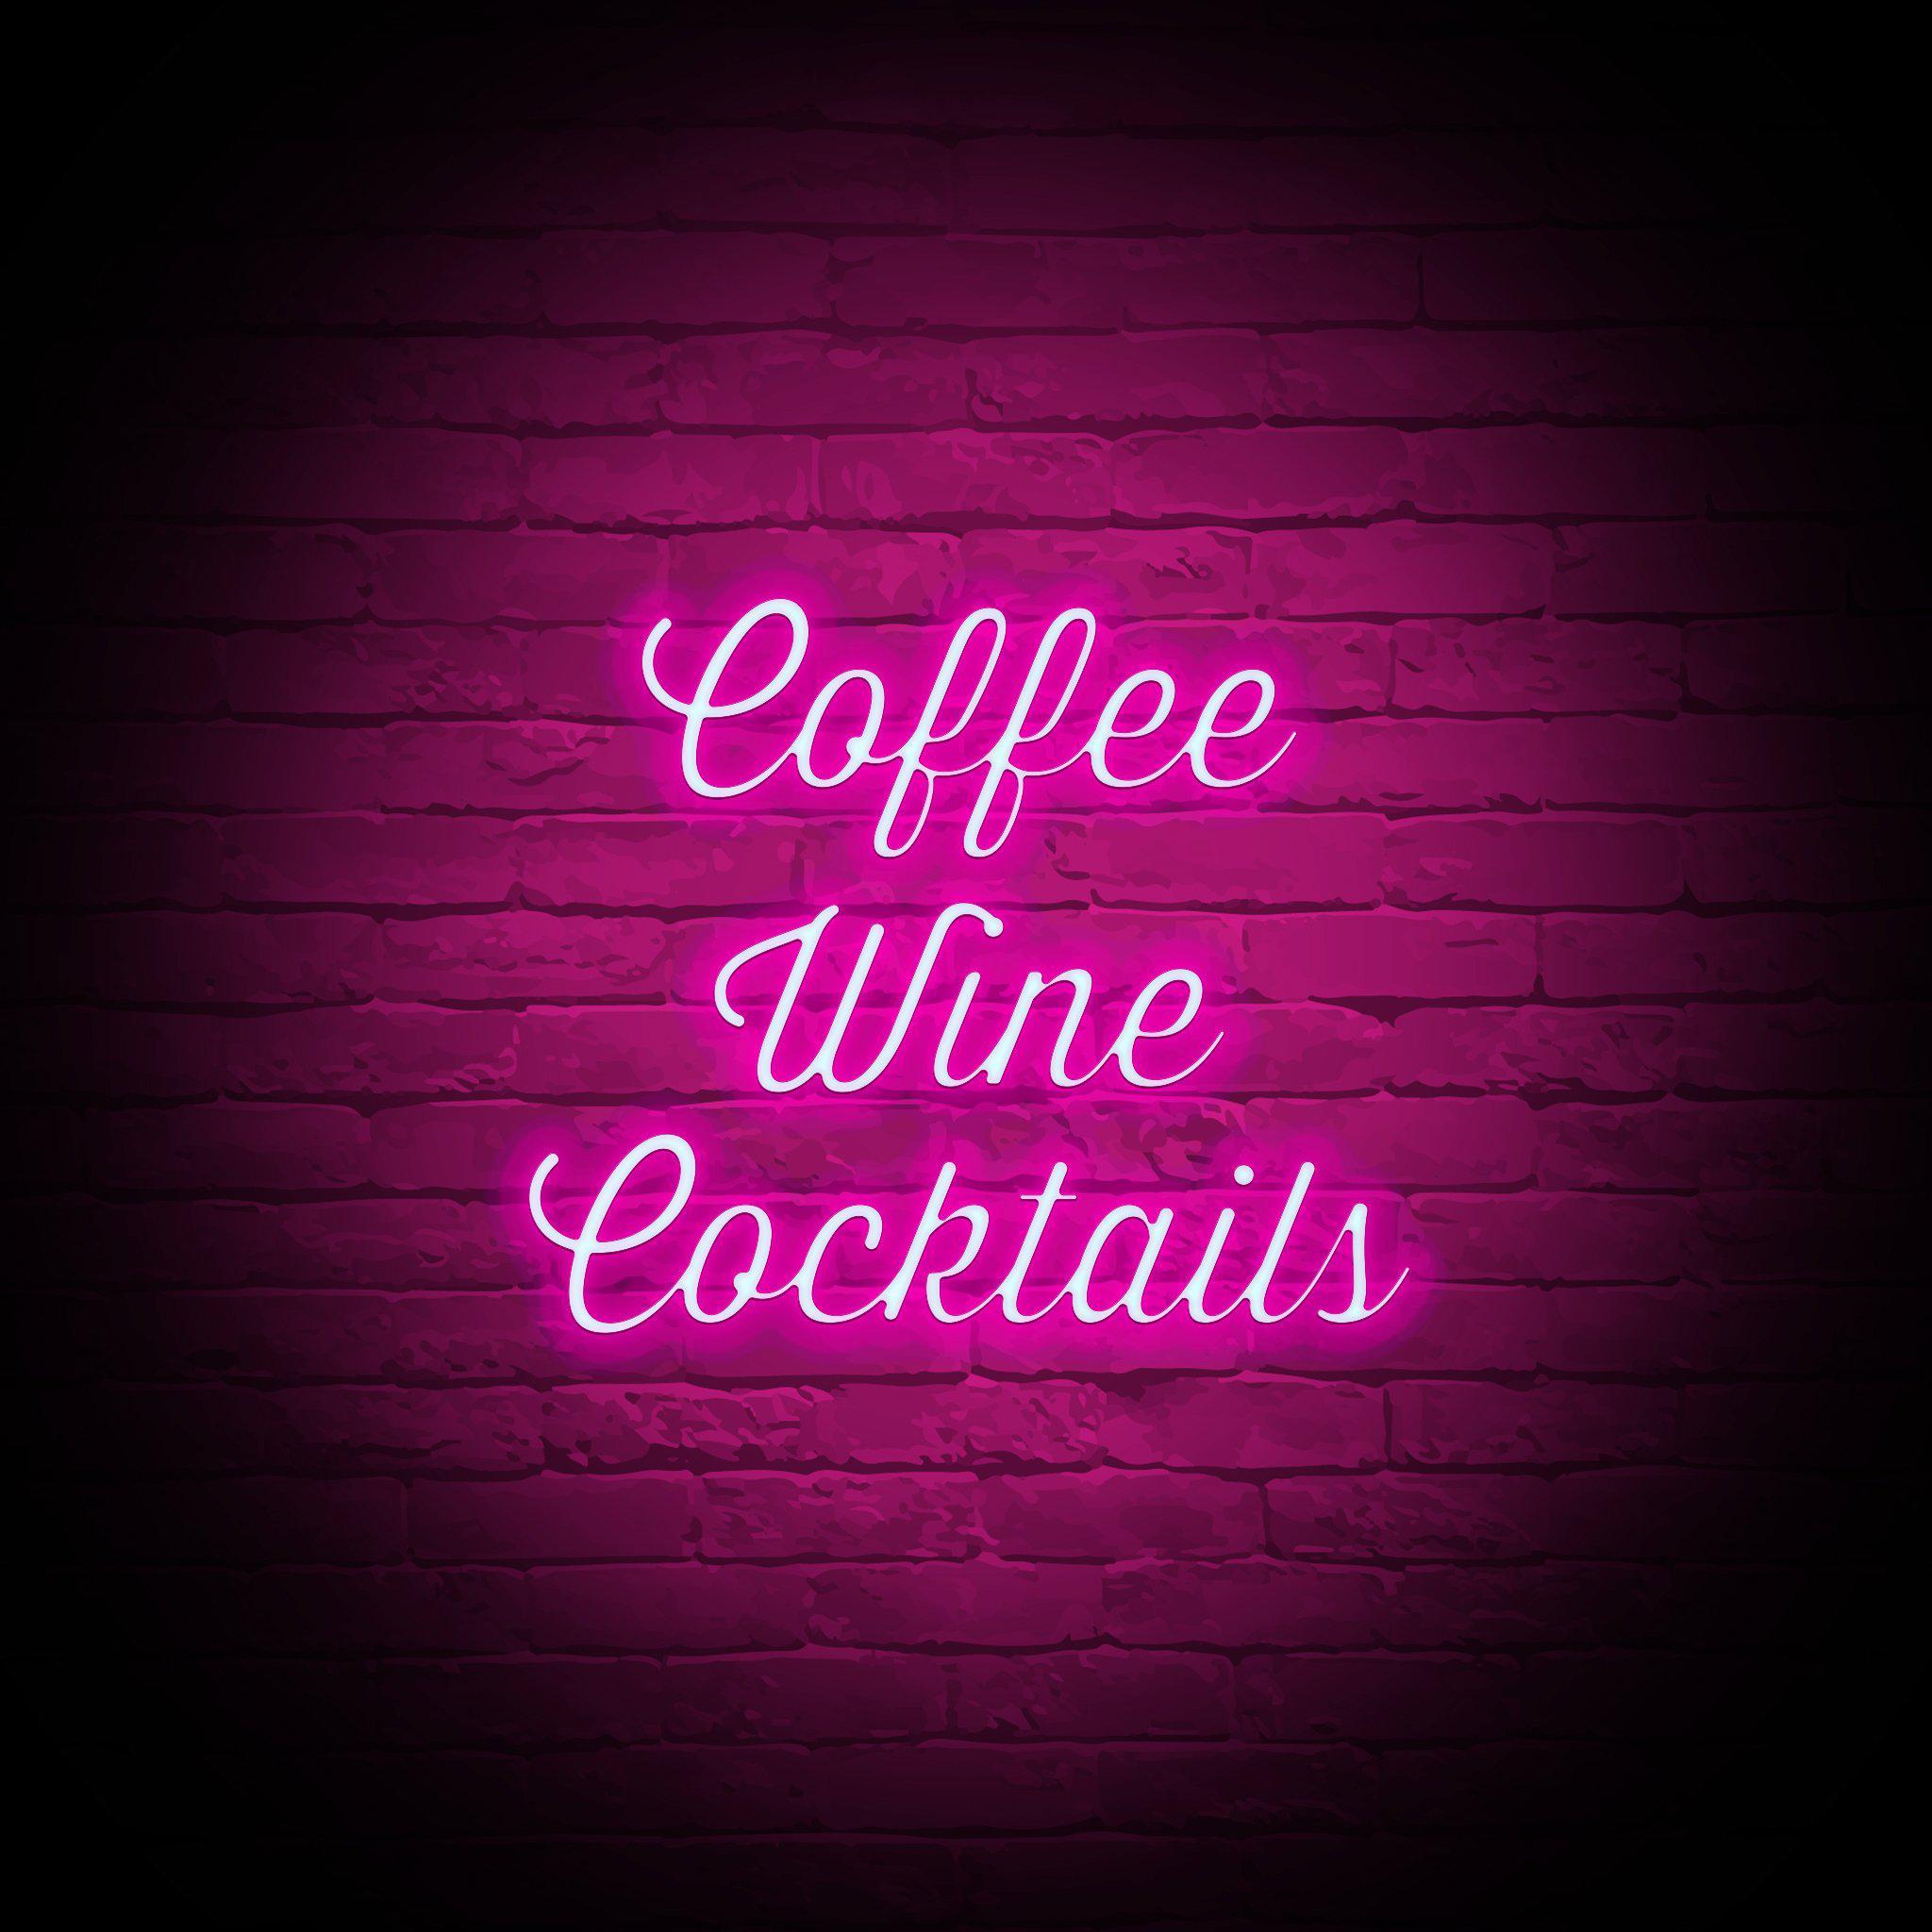 'COFFEE WINE COCKTAILS' NEON SIGN